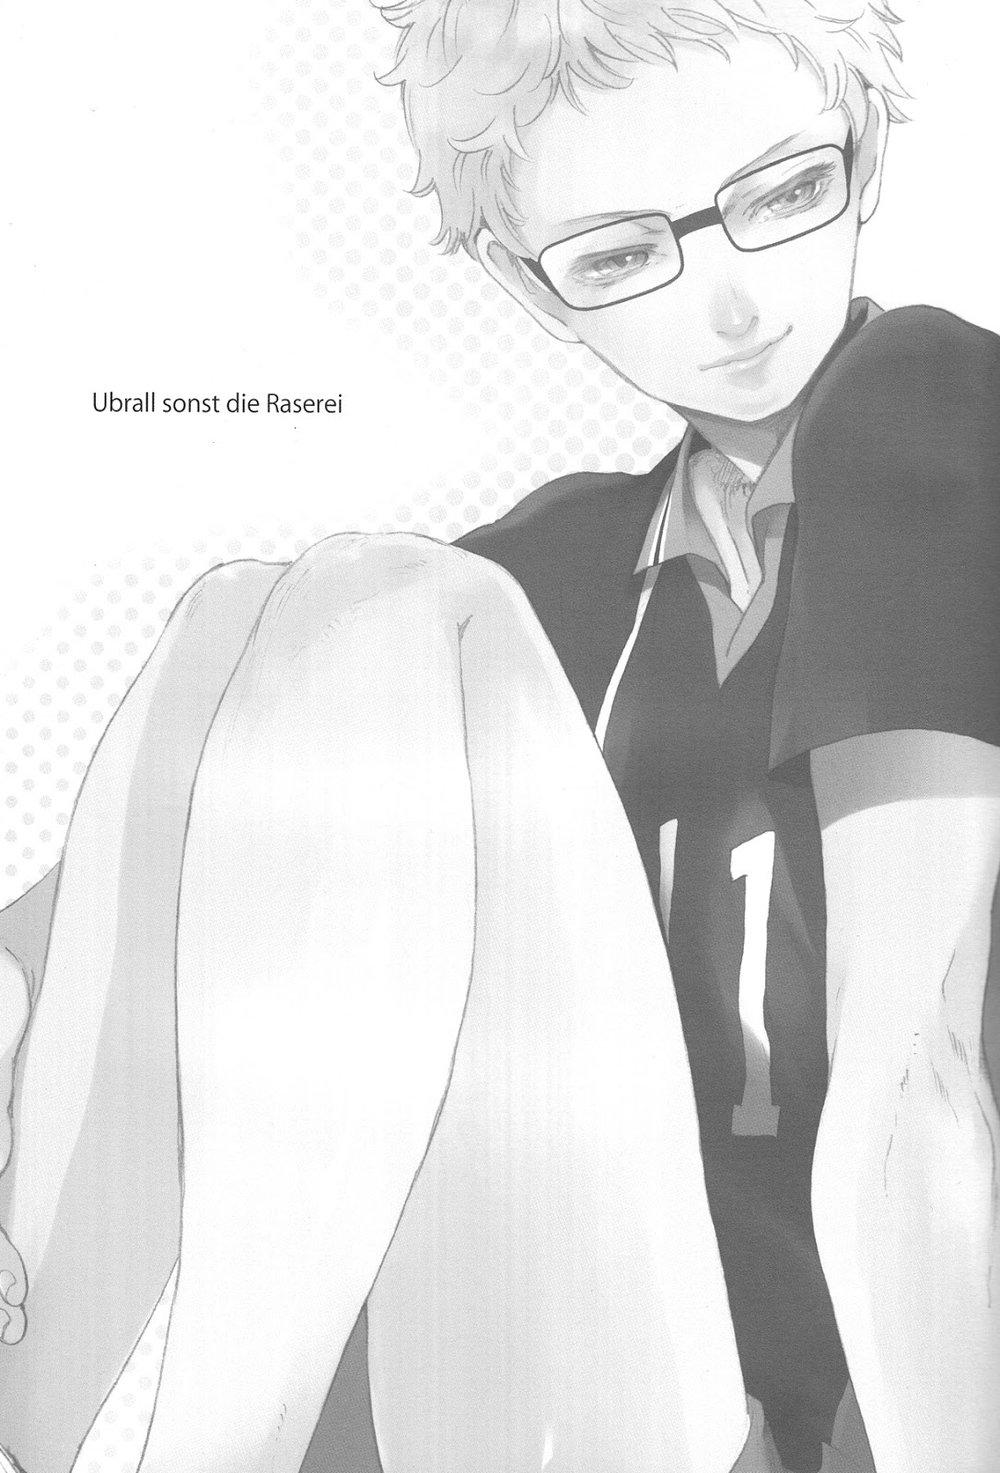 Monster Ubrall sonst die Raserei - Haikyuu Chica - Page 2